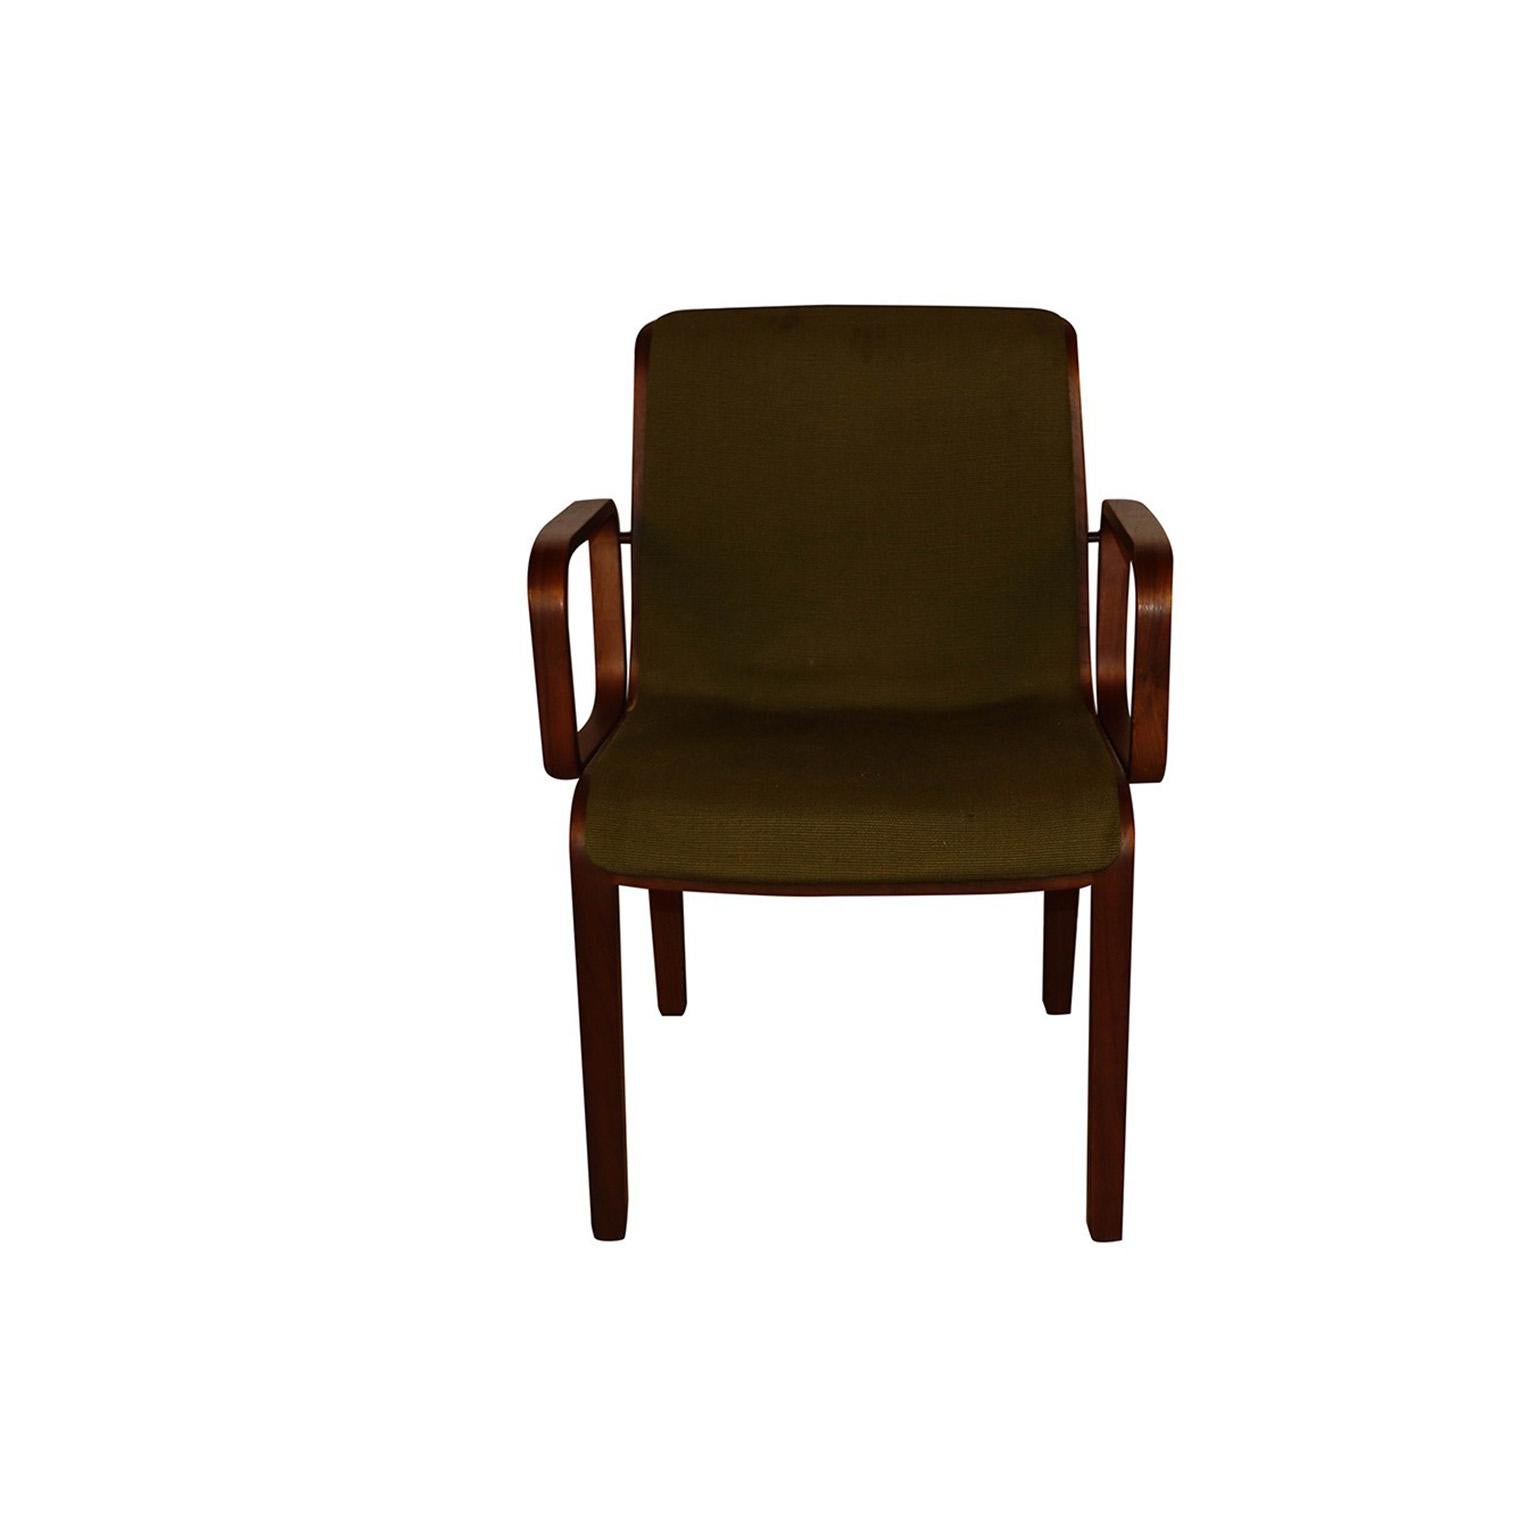 Extraordinary Mid-Century Modern dining/accent chair Model 1305UO, designed by William “Bill” Stephens for Knoll International, 1970s. Manufactured 1972-1988. Featuring original, striking olive green upholstery on the front and back that continues